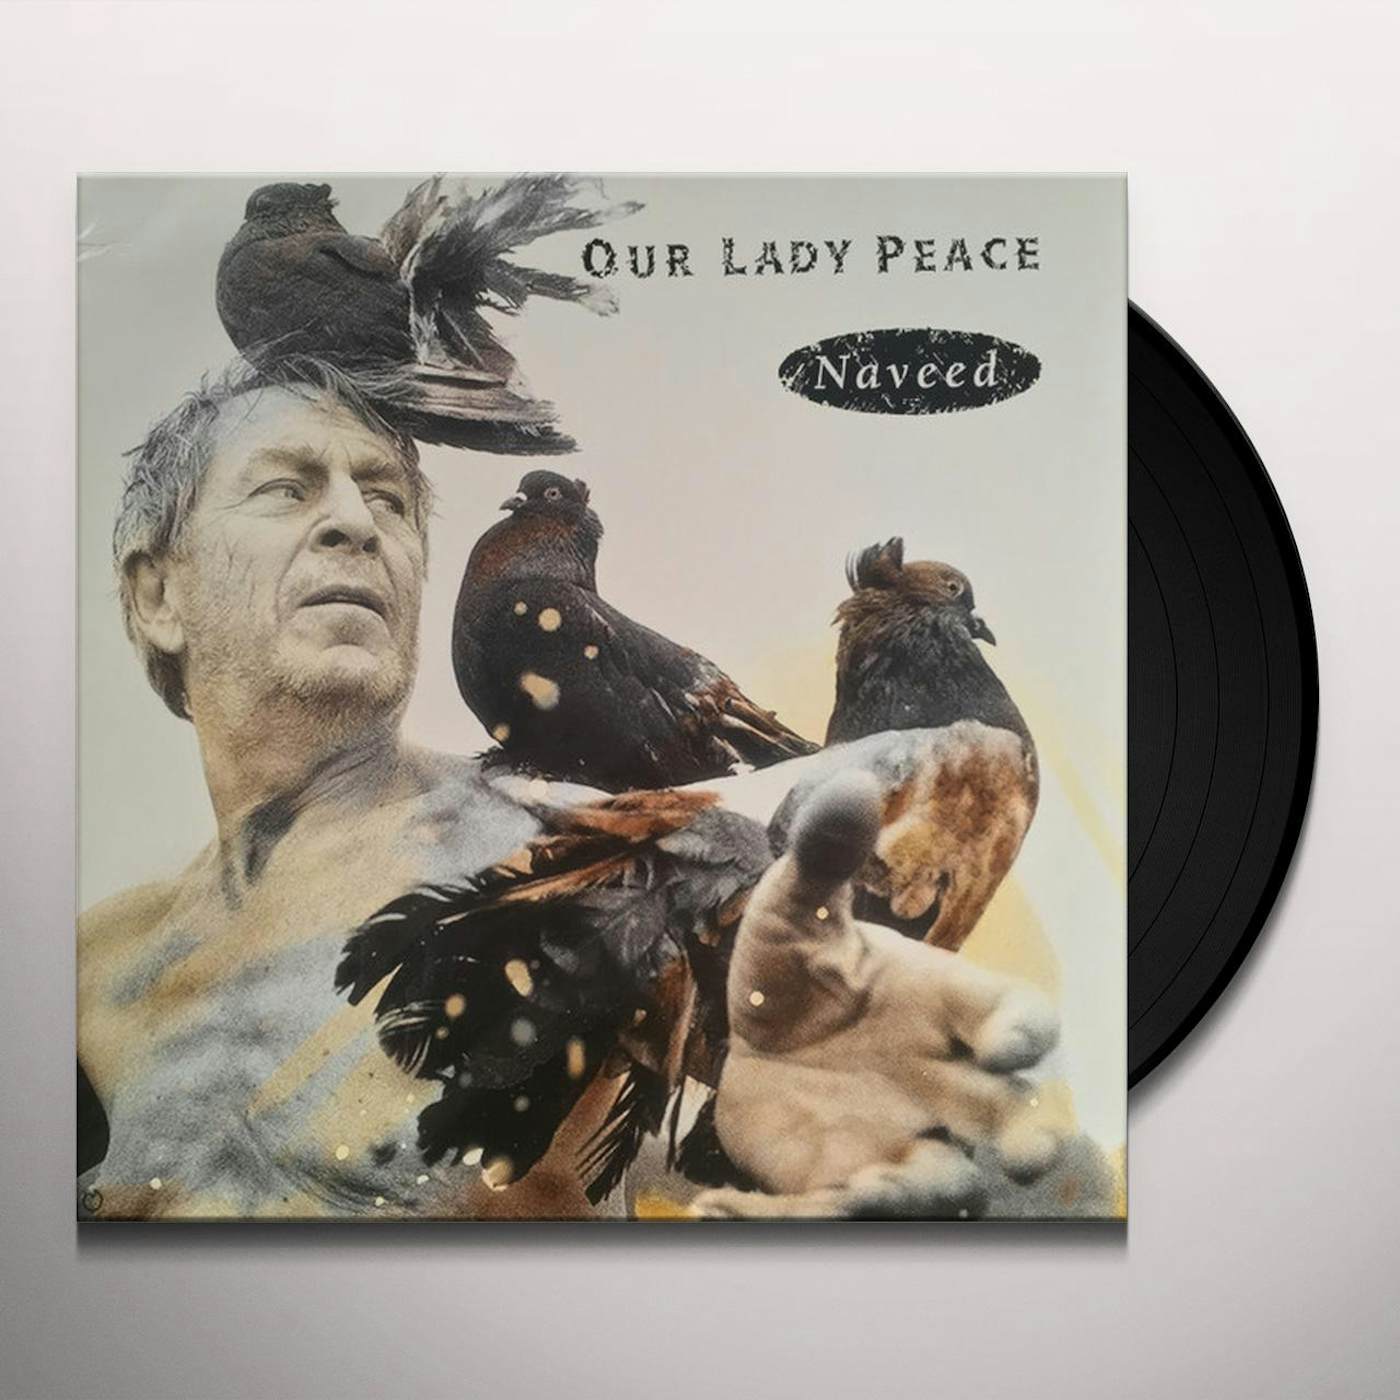 Our Lady Peace Naveed Vinyl Record